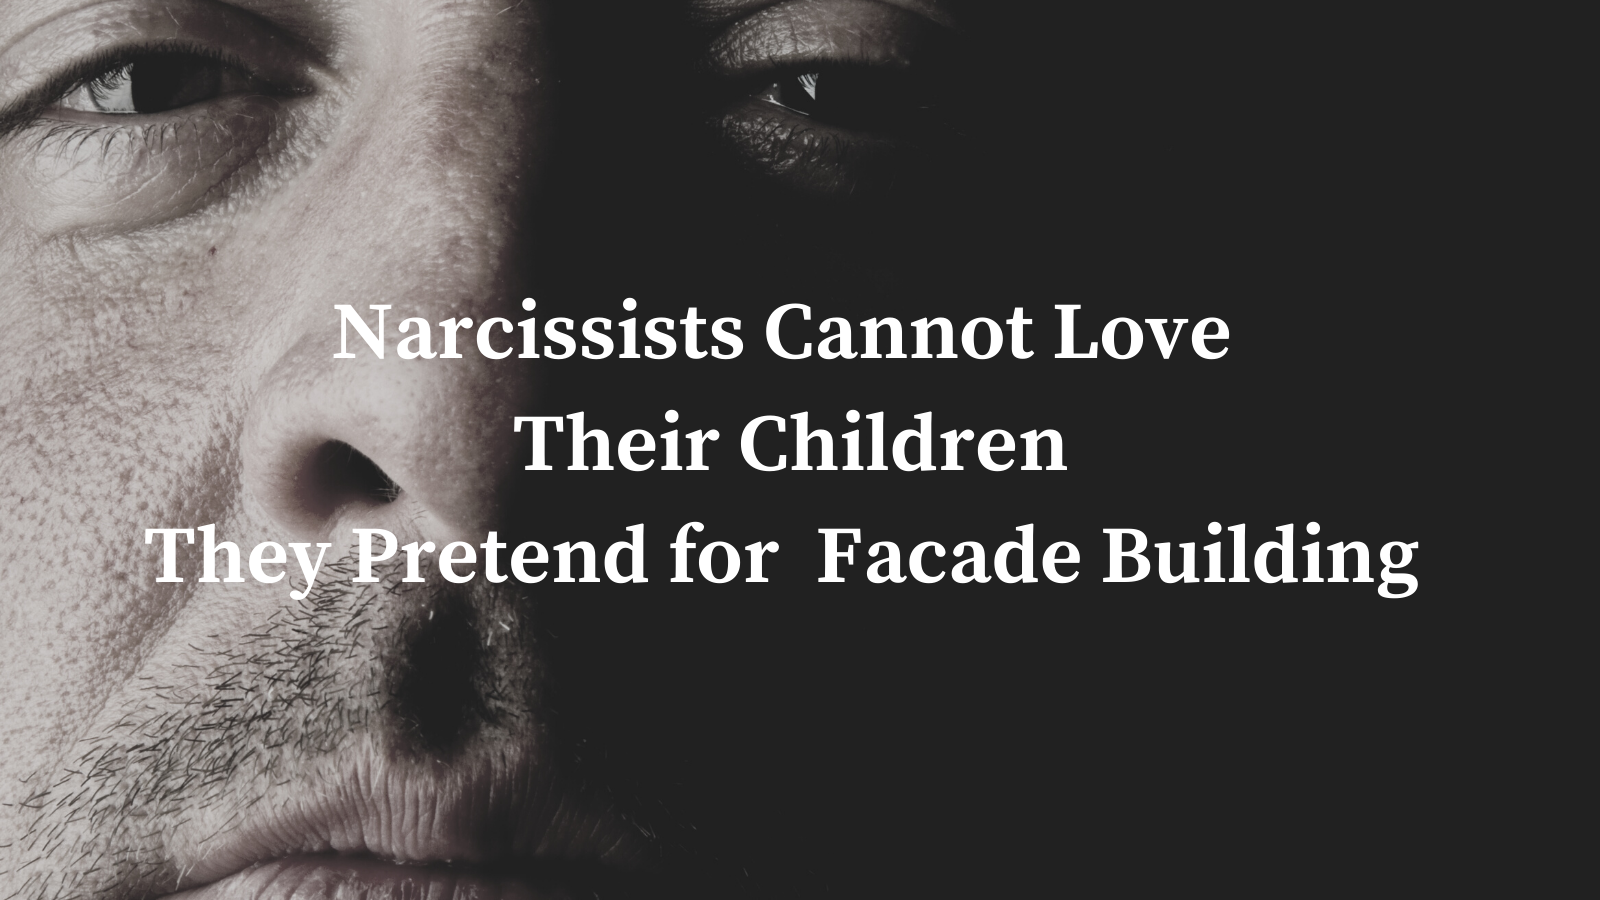 Narcissists Cannot Love Their Children They Pretend for Facade Building (9)